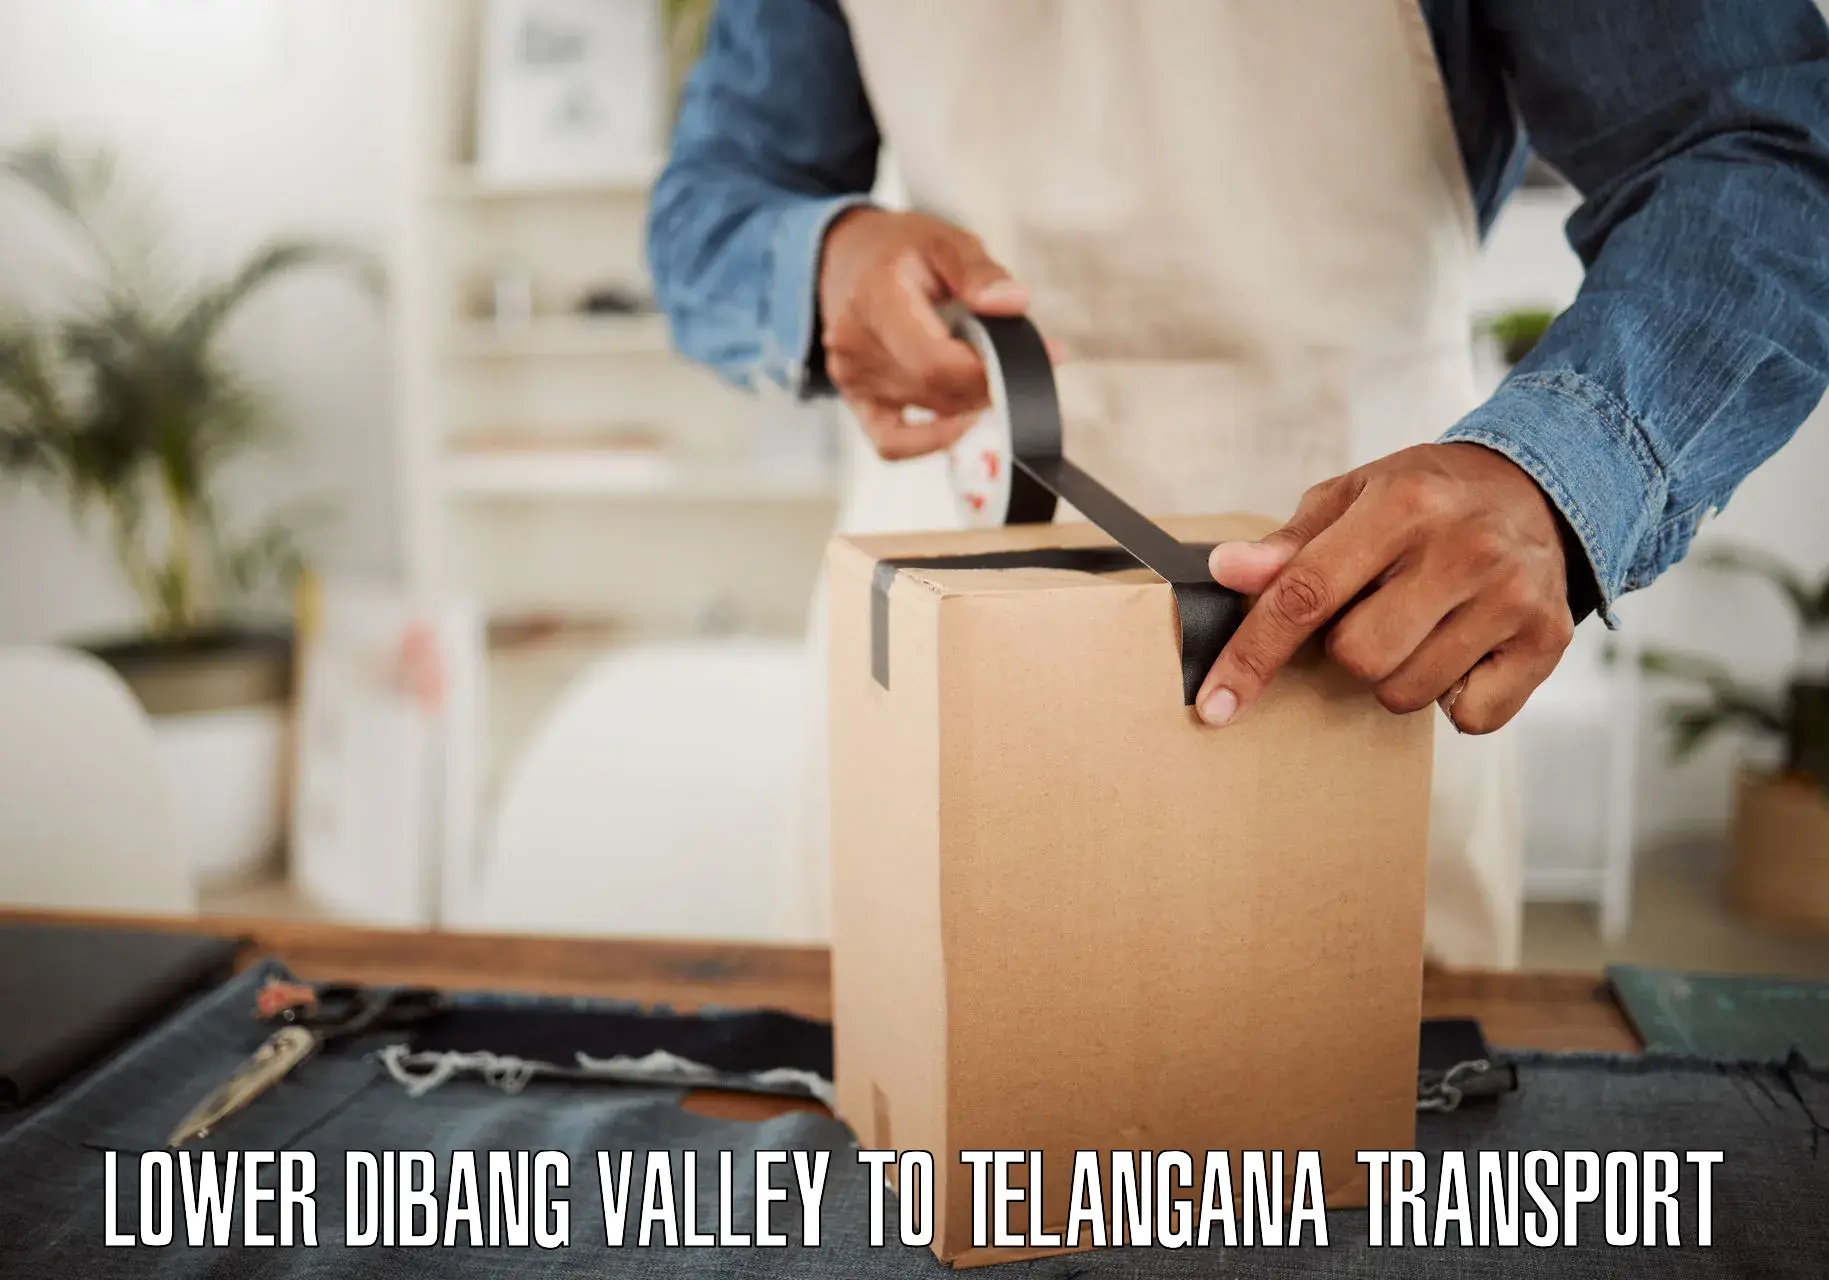 Logistics transportation services in Lower Dibang Valley to Shankarpalle